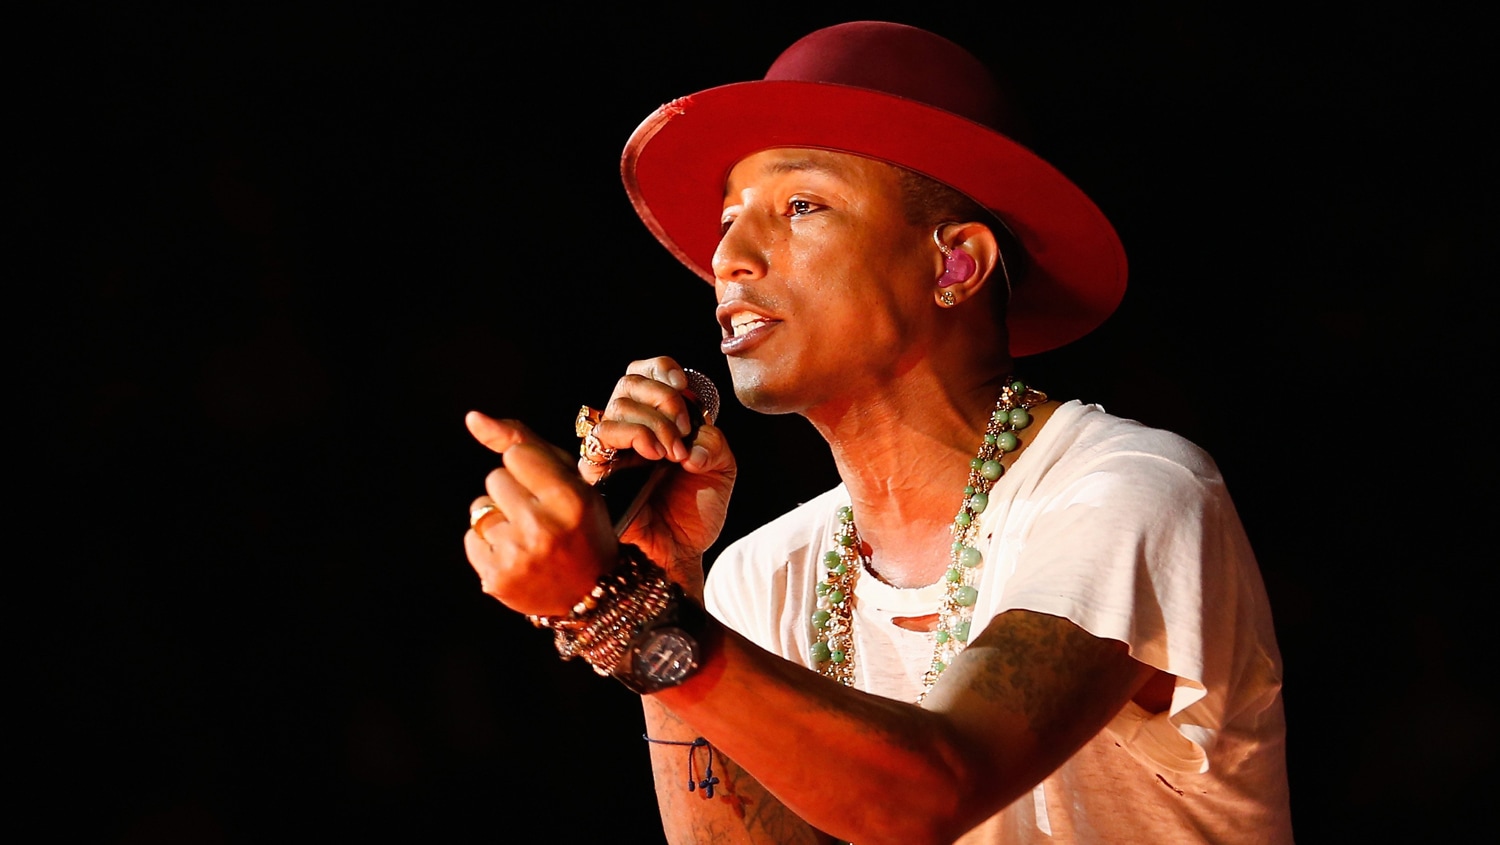 Stream Pharrell Williams - Frontin' (ALTO EDIT) (FREE DOWNLOAD) by